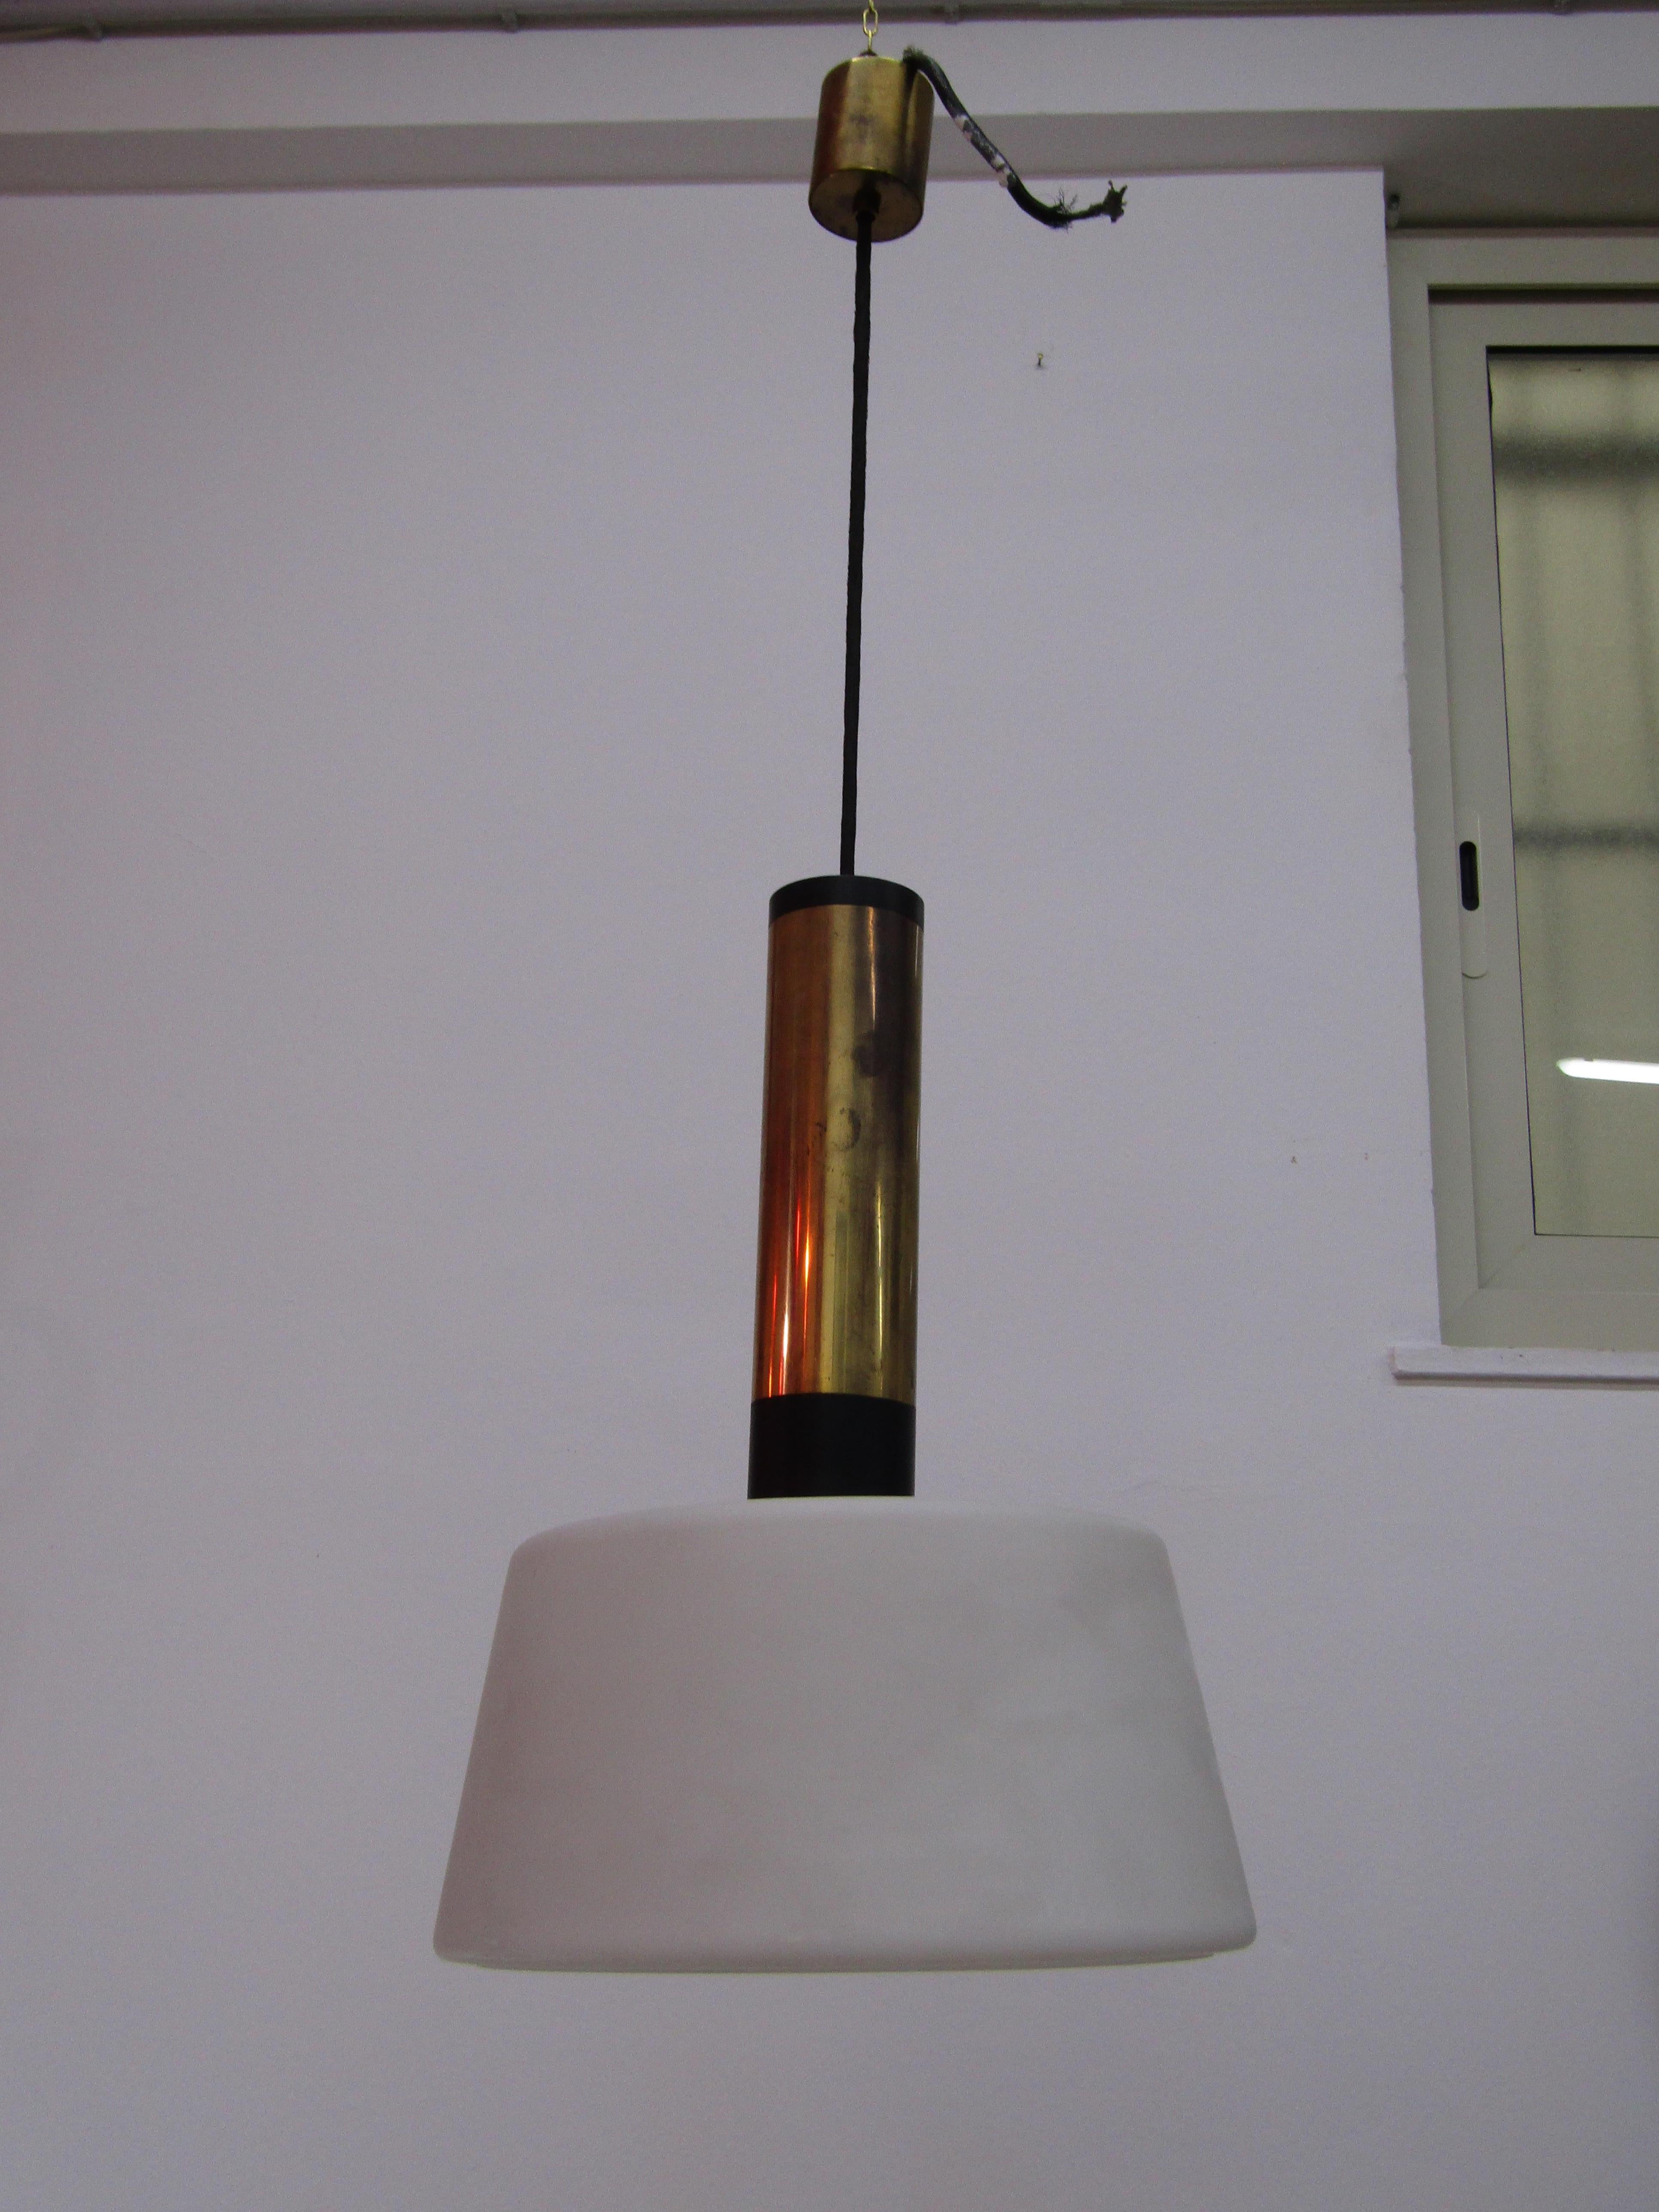 Suspension lamp made by Stilnovo in Italy with a brass structure and  midcentury For Sale 2